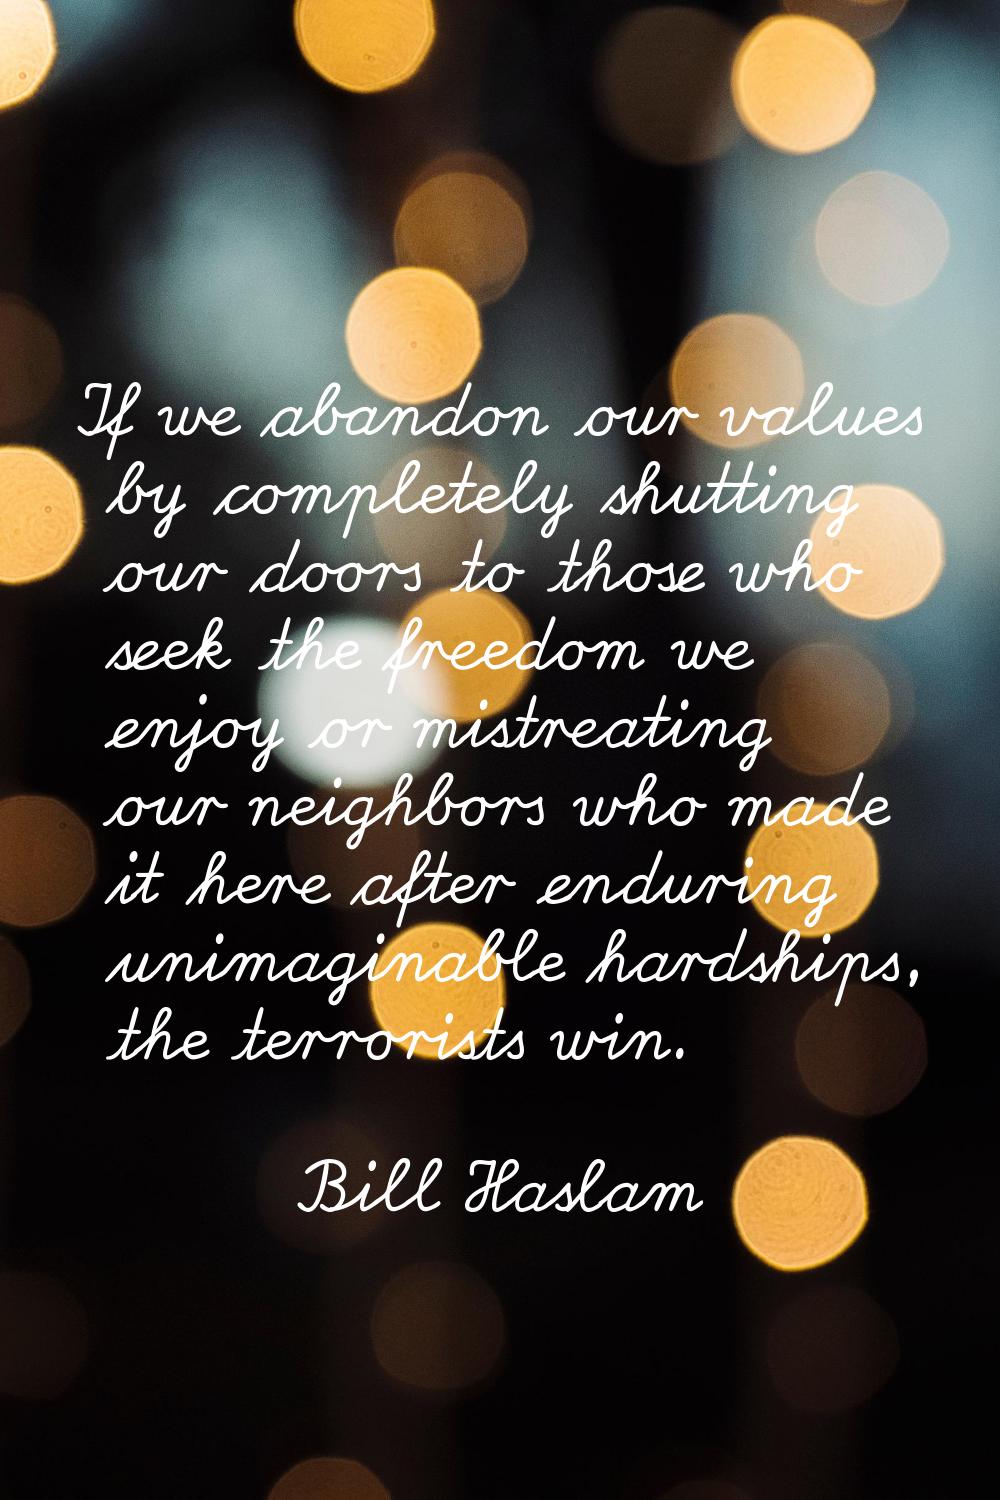 If we abandon our values by completely shutting our doors to those who seek the freedom we enjoy or